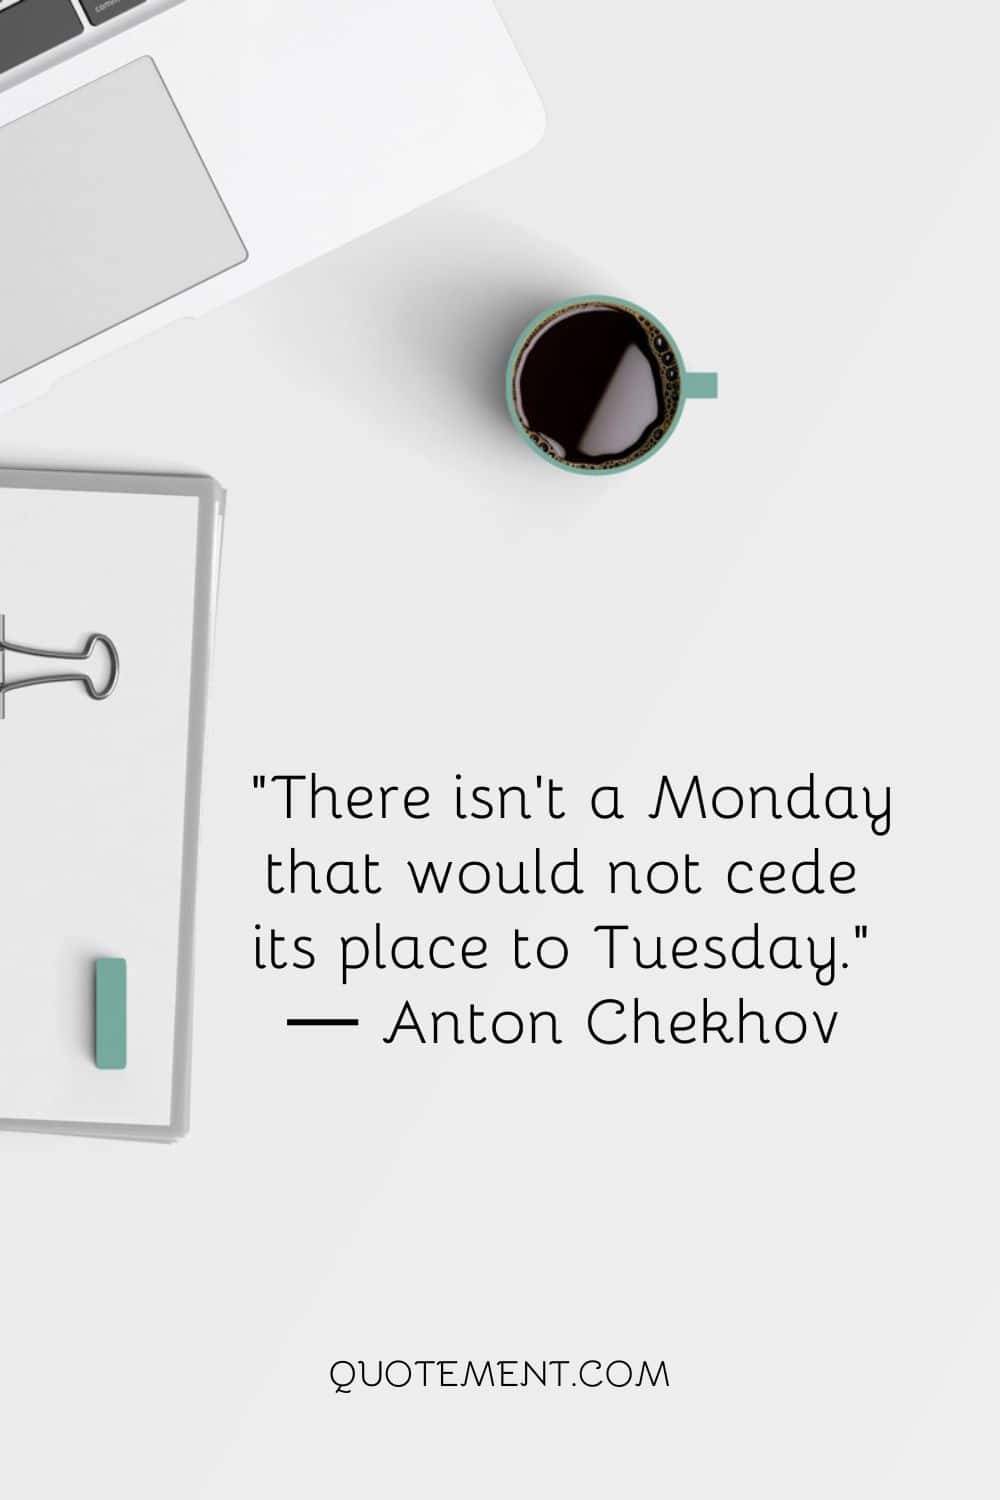 There isn’t a Monday that would not cede its place to Tuesday